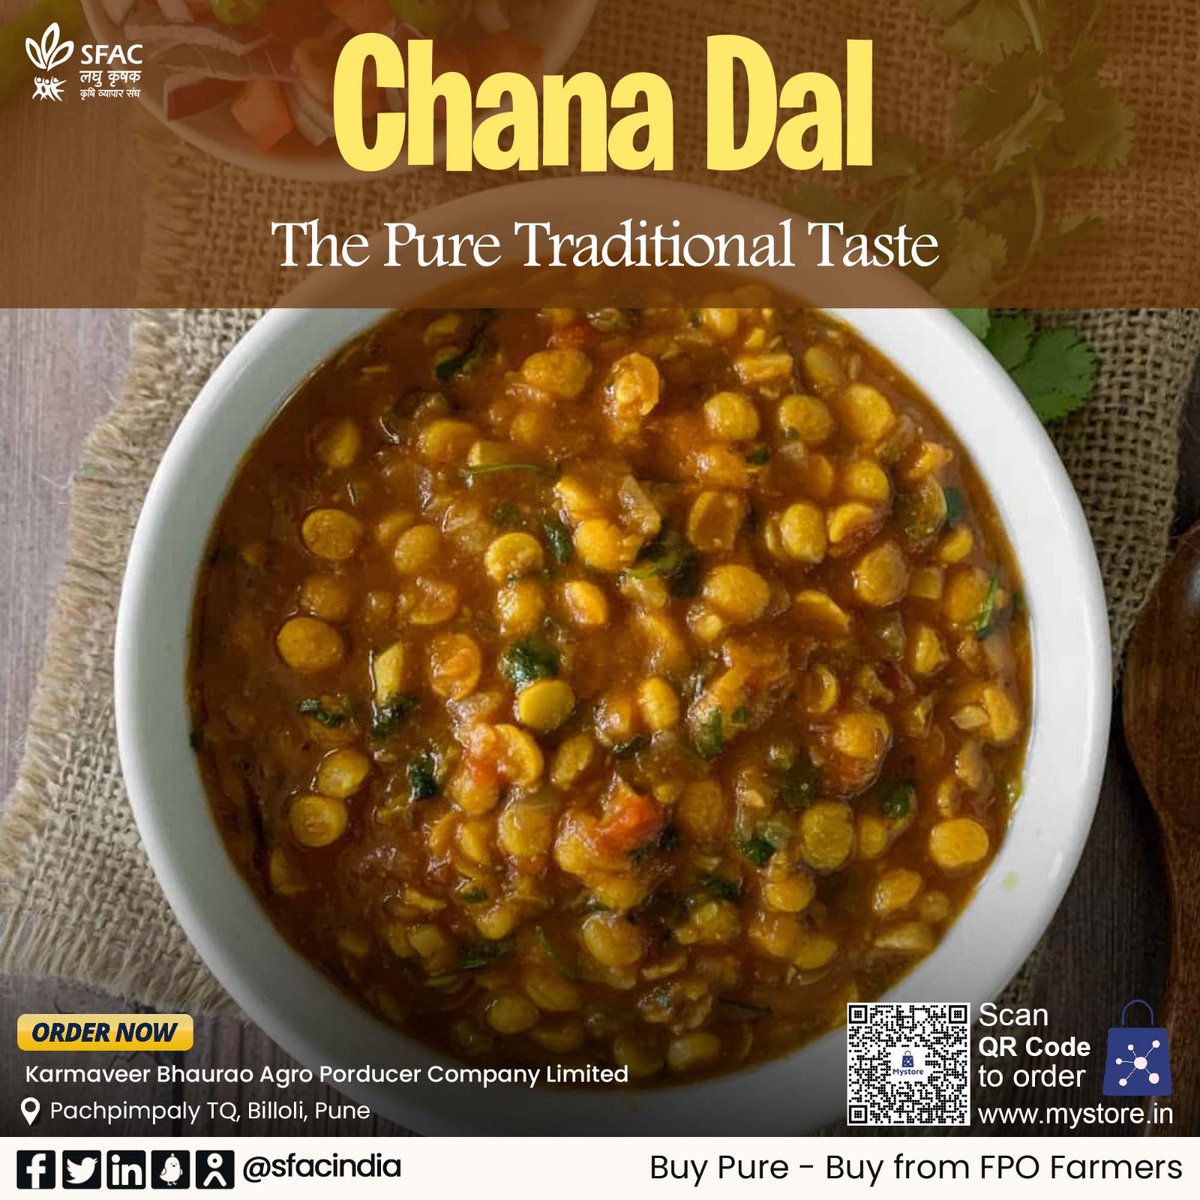 Unpolished organic chana dal. Healthy & delicious dal for daily meals & occasions. Prepare light or spicy, always enjoy the best taste. Buy straight from FPO farmers at👇 mystore.in/en/product/63f… 🍲 #VocalForLocal #healthyeating #healthyhabits #healthychoices #tastyrecipes